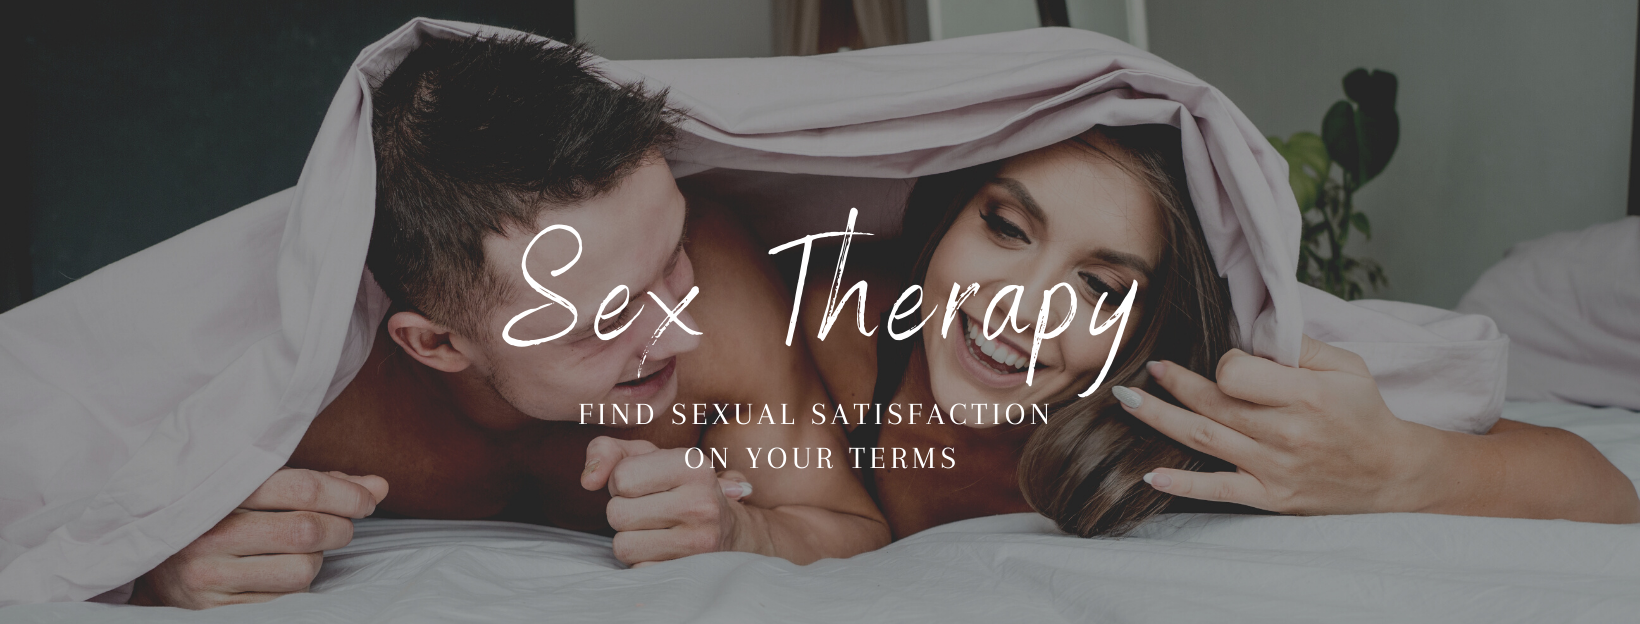 sex therapy for married couples